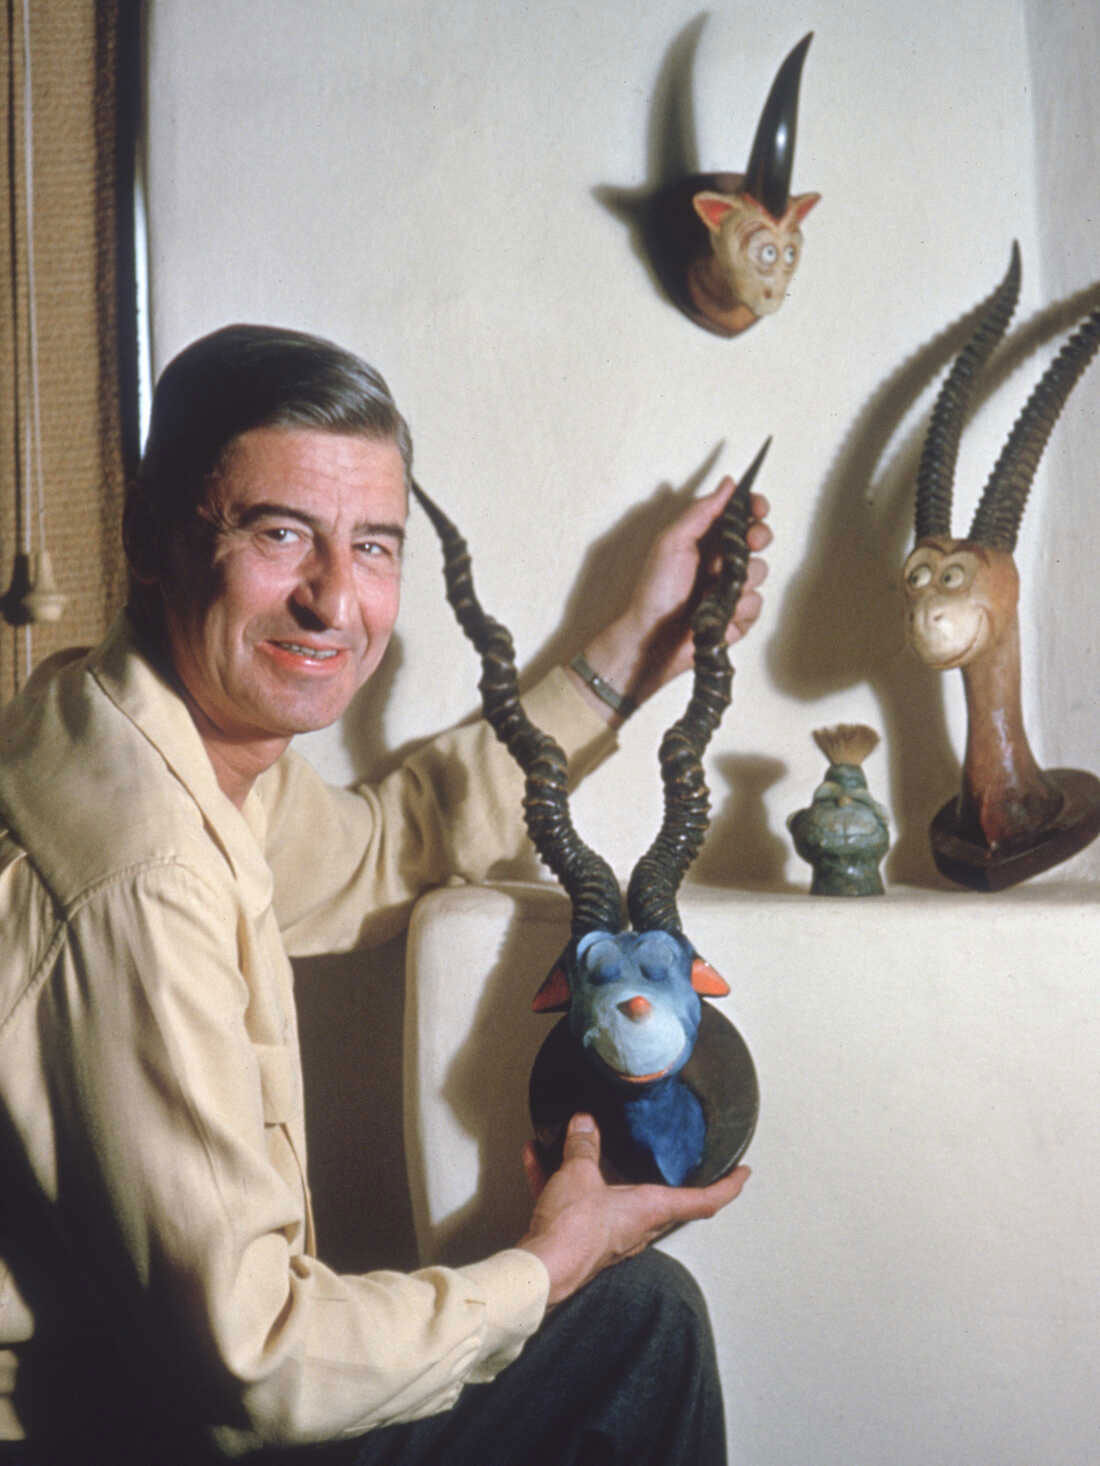 Geisel eventually created 17 whimsical creatures — eight of which are still in the collection of his estate, and a couple of which are owned by collectors. He is shown with Two Horned Drouberhannis, Blue-Green Abelard, Mulberry Street Unicorn, and the Mugglesmirt